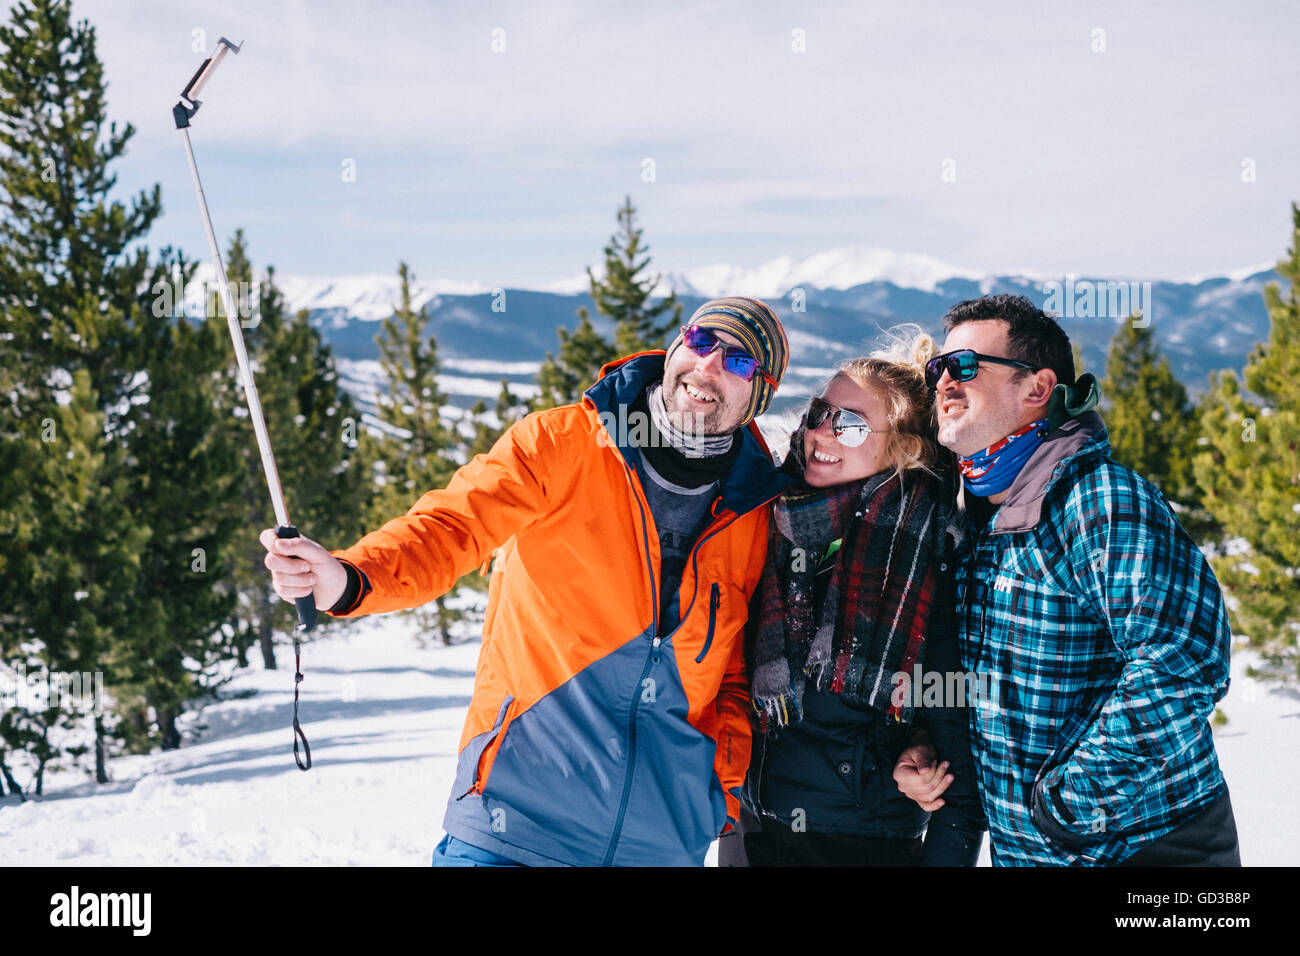 Three people, two men and a young woman in skiing gear posing for a selfie, one holding a selfie stick. Stock Photo